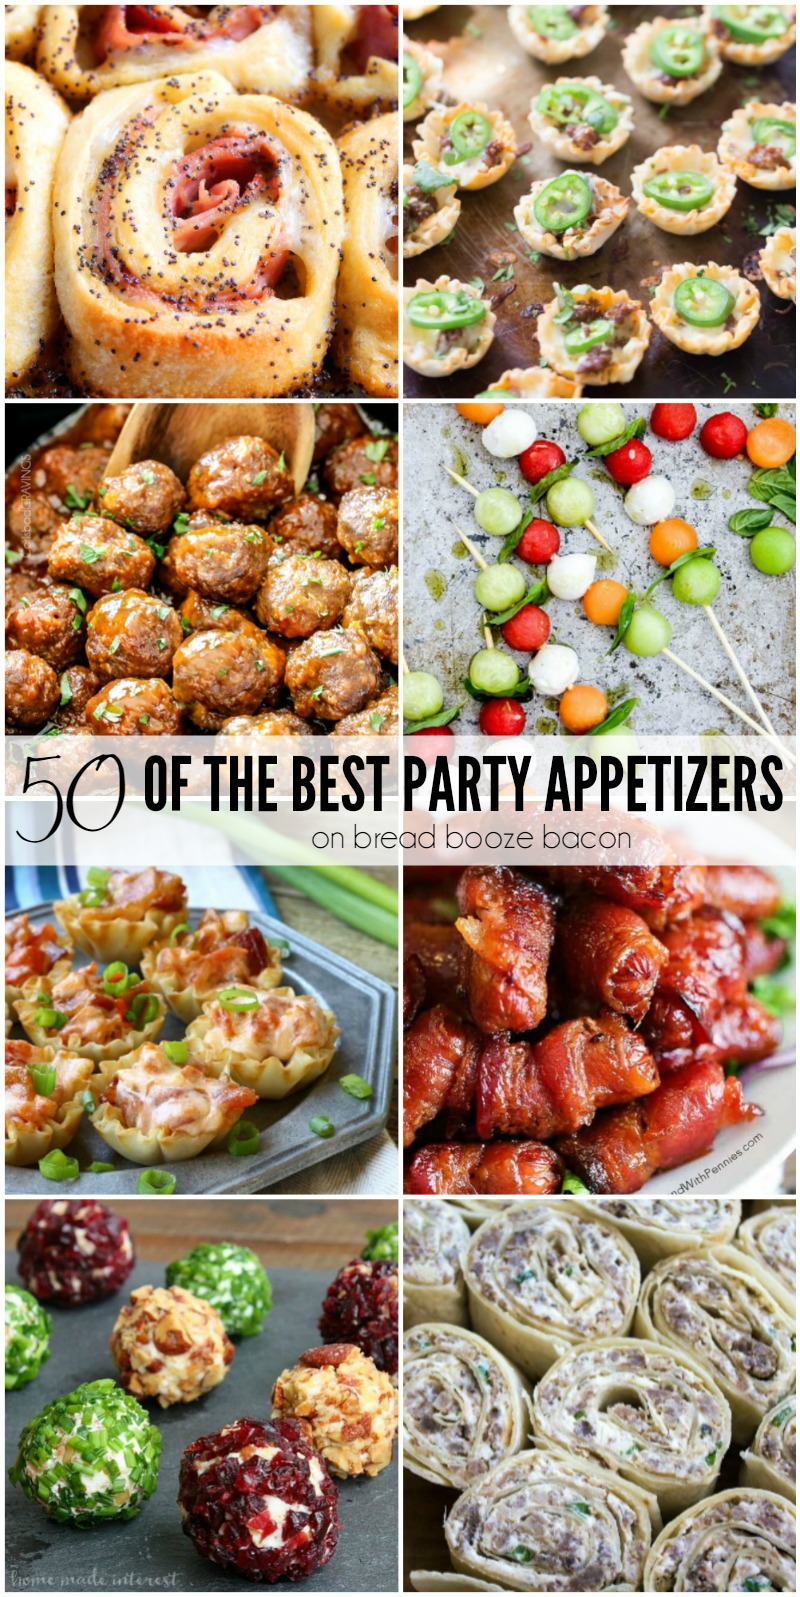 Appetizers to bring to a party